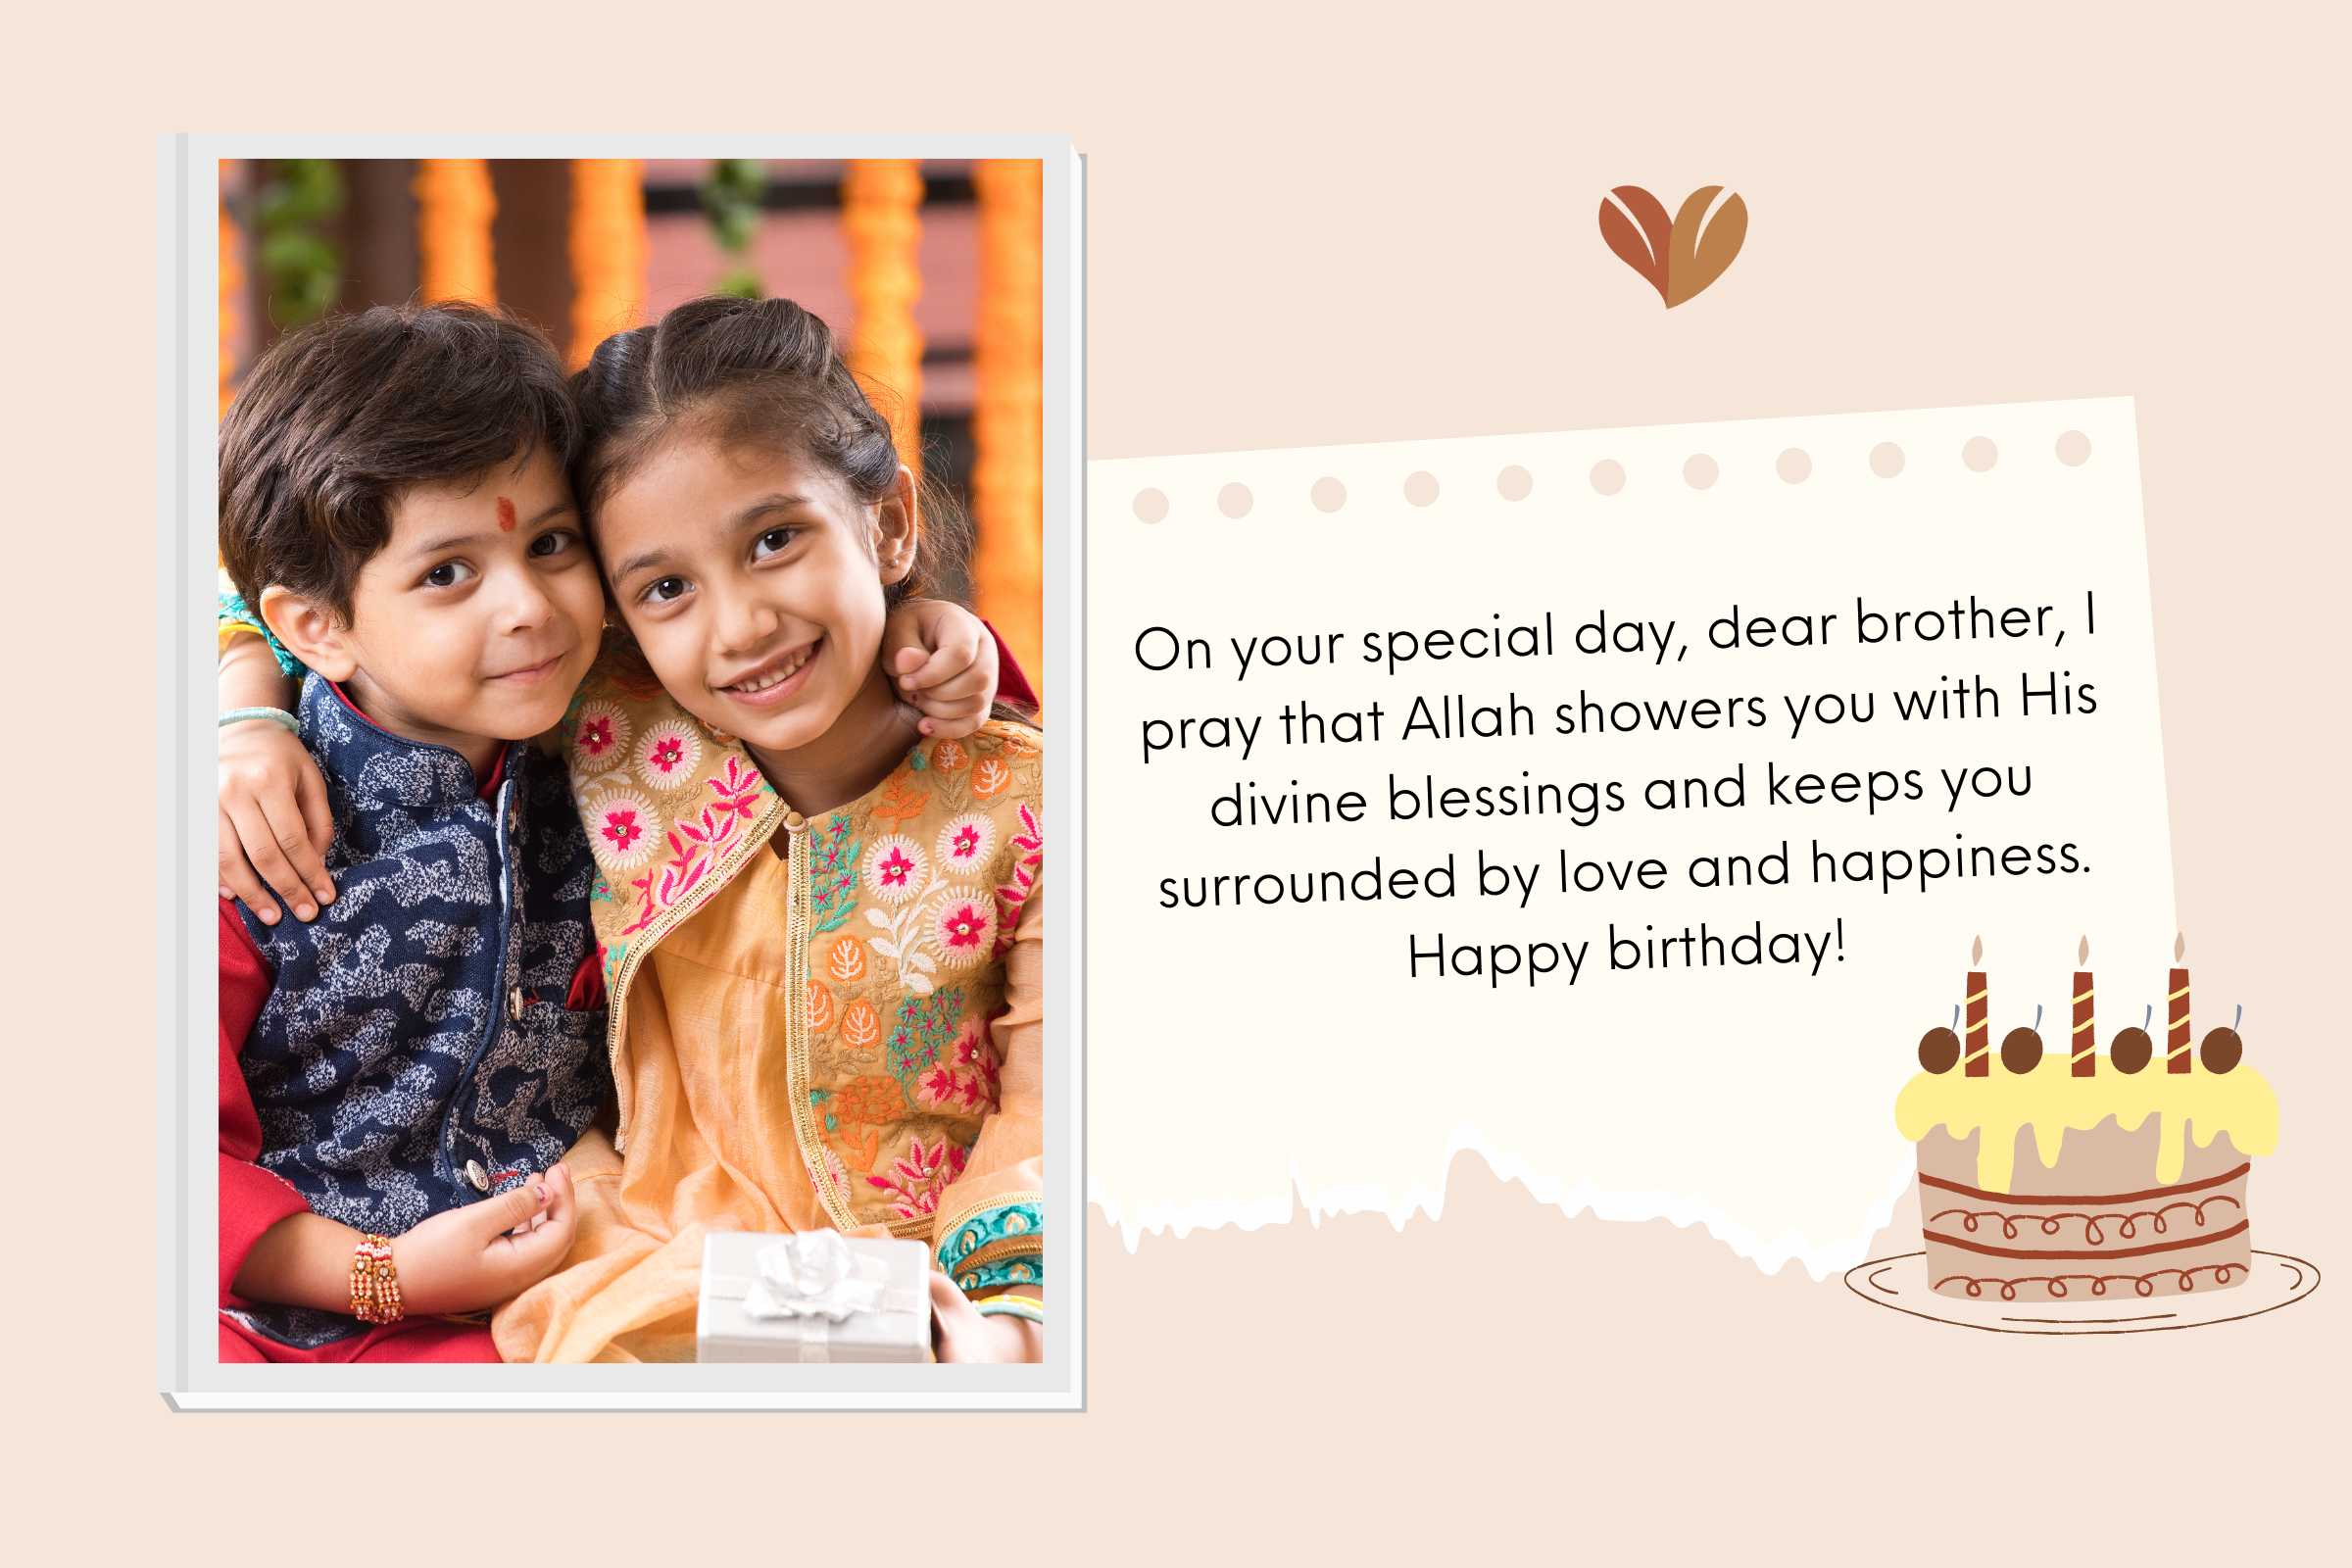 Praying Allah showers you with His divine blessings - Islamic birthday wishes for brother